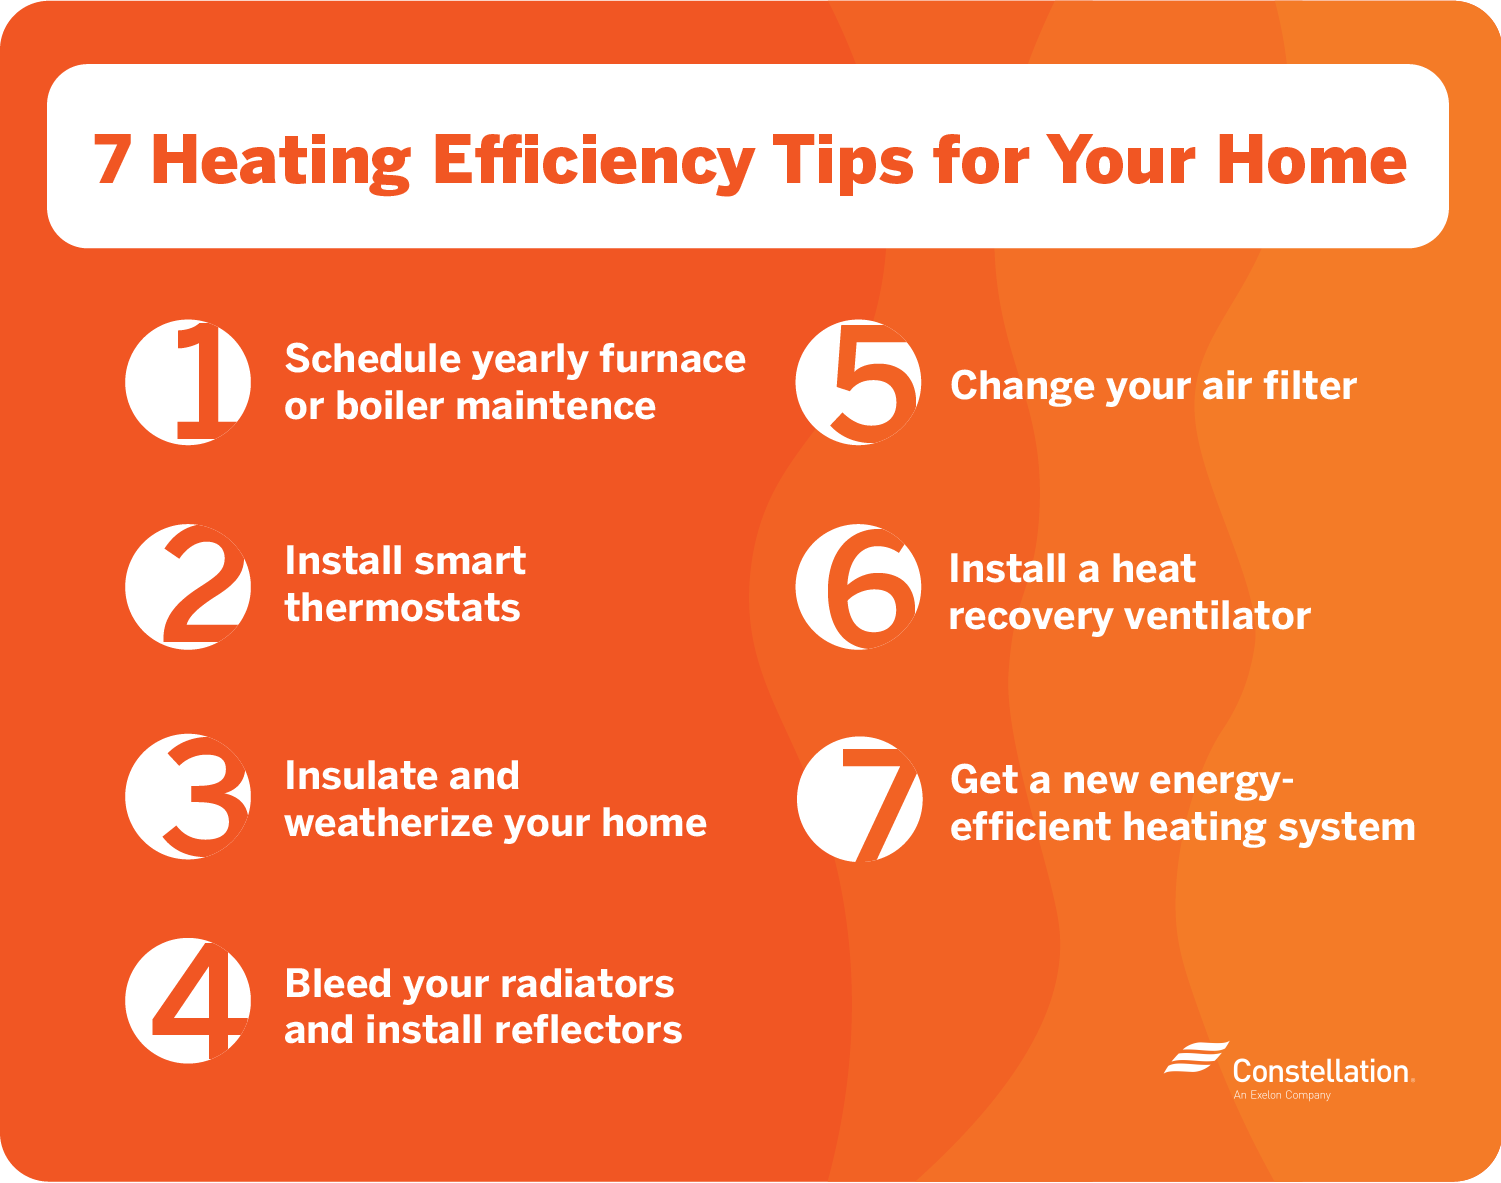 Heating efficiency tips for your home.